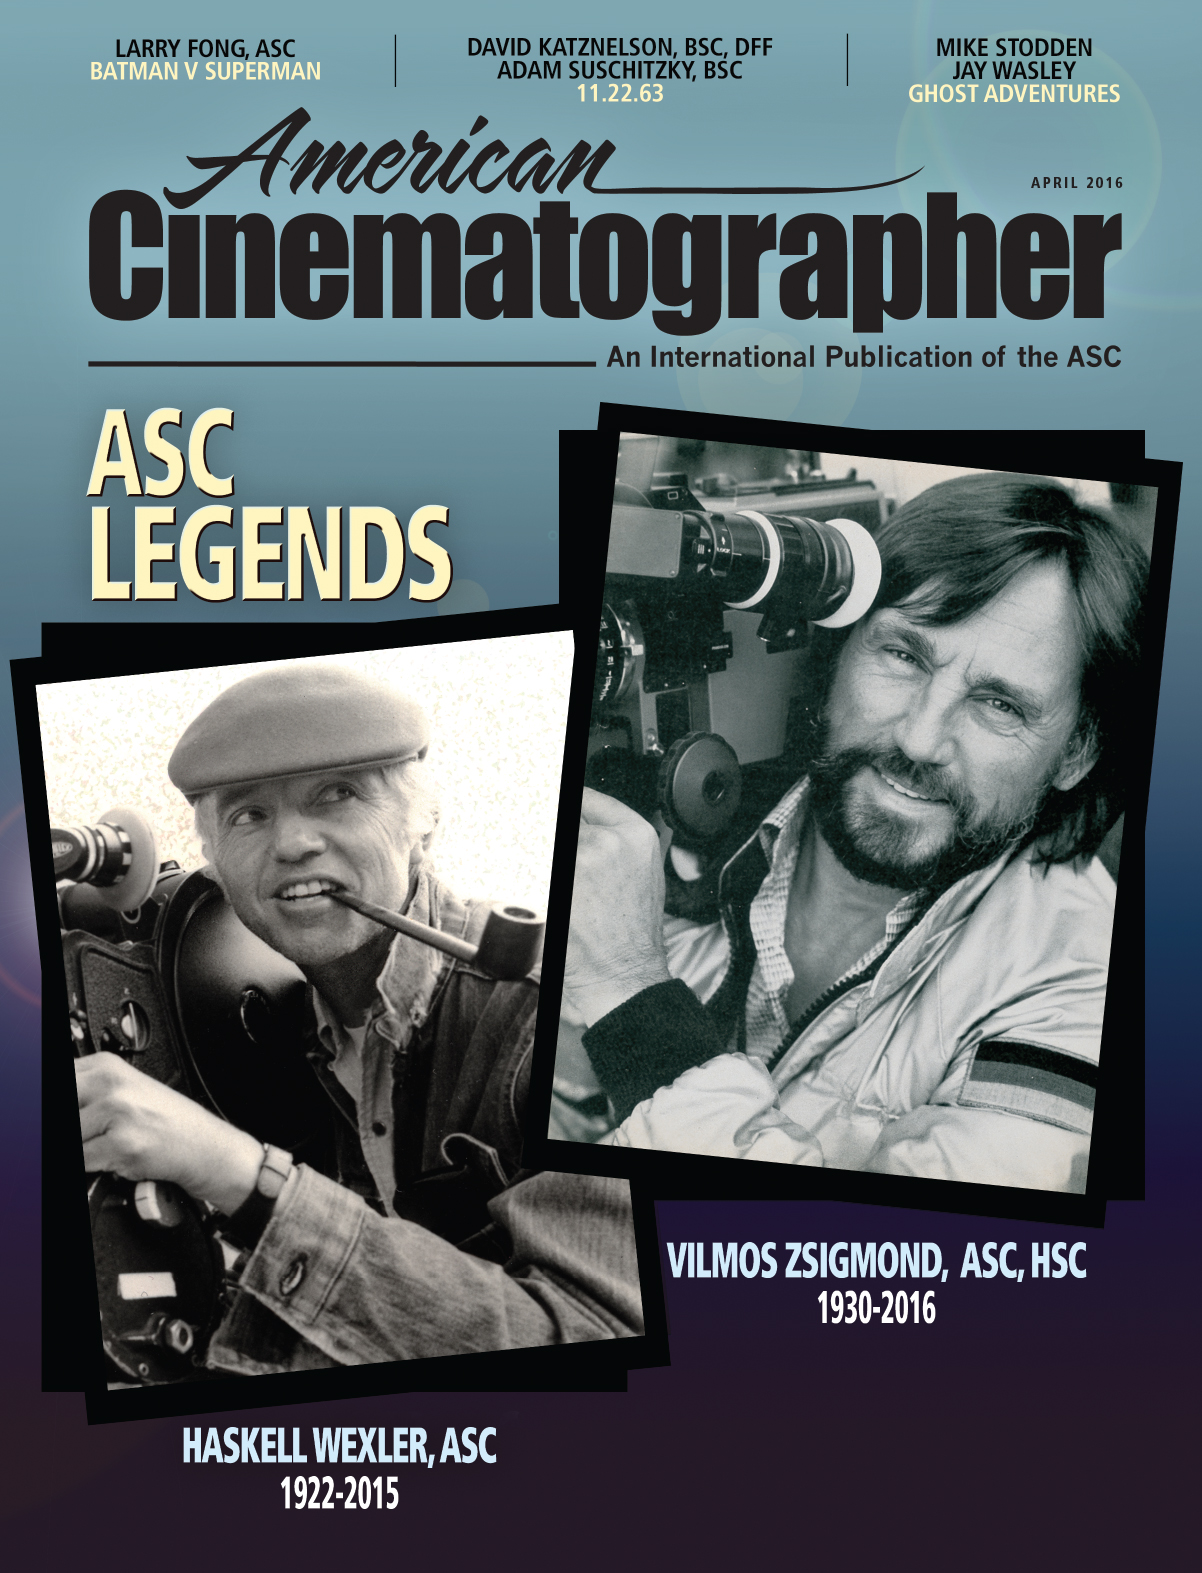 The April, 2016 issue of American Cinematographer.